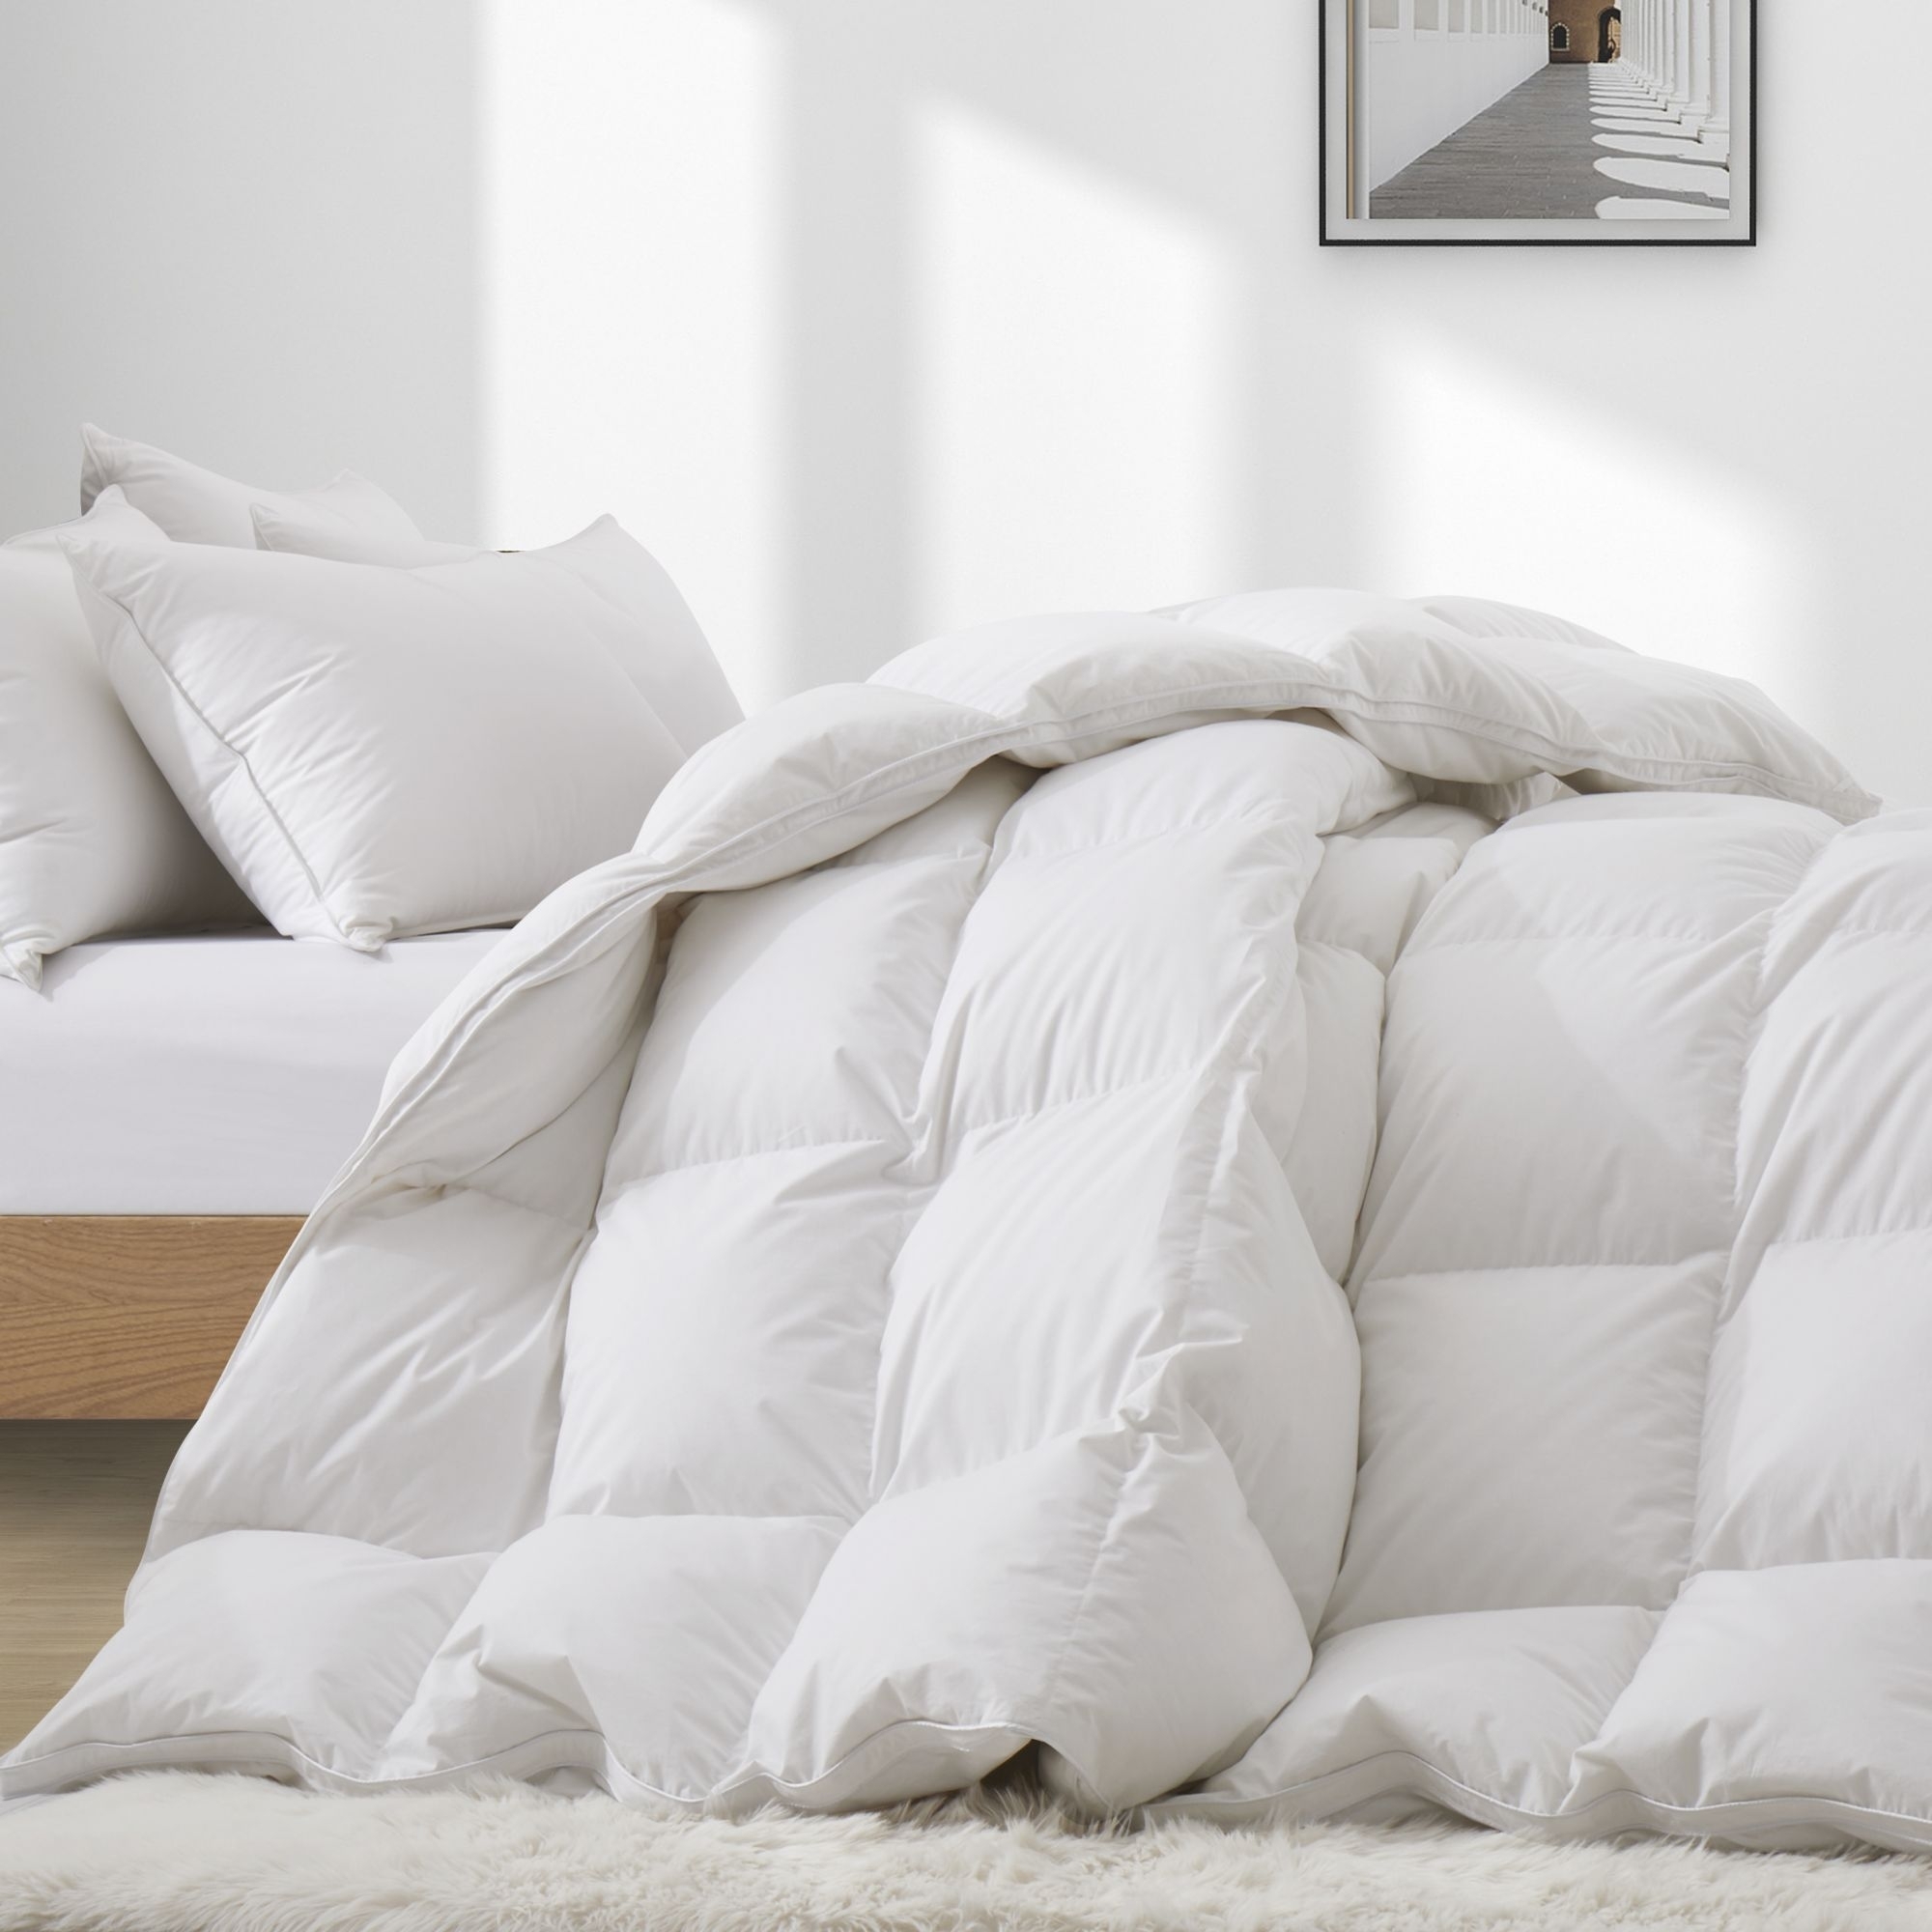 800 Fill Power European White Down Comforter-Heavy Weight Comforter For Cold Winter - King Size